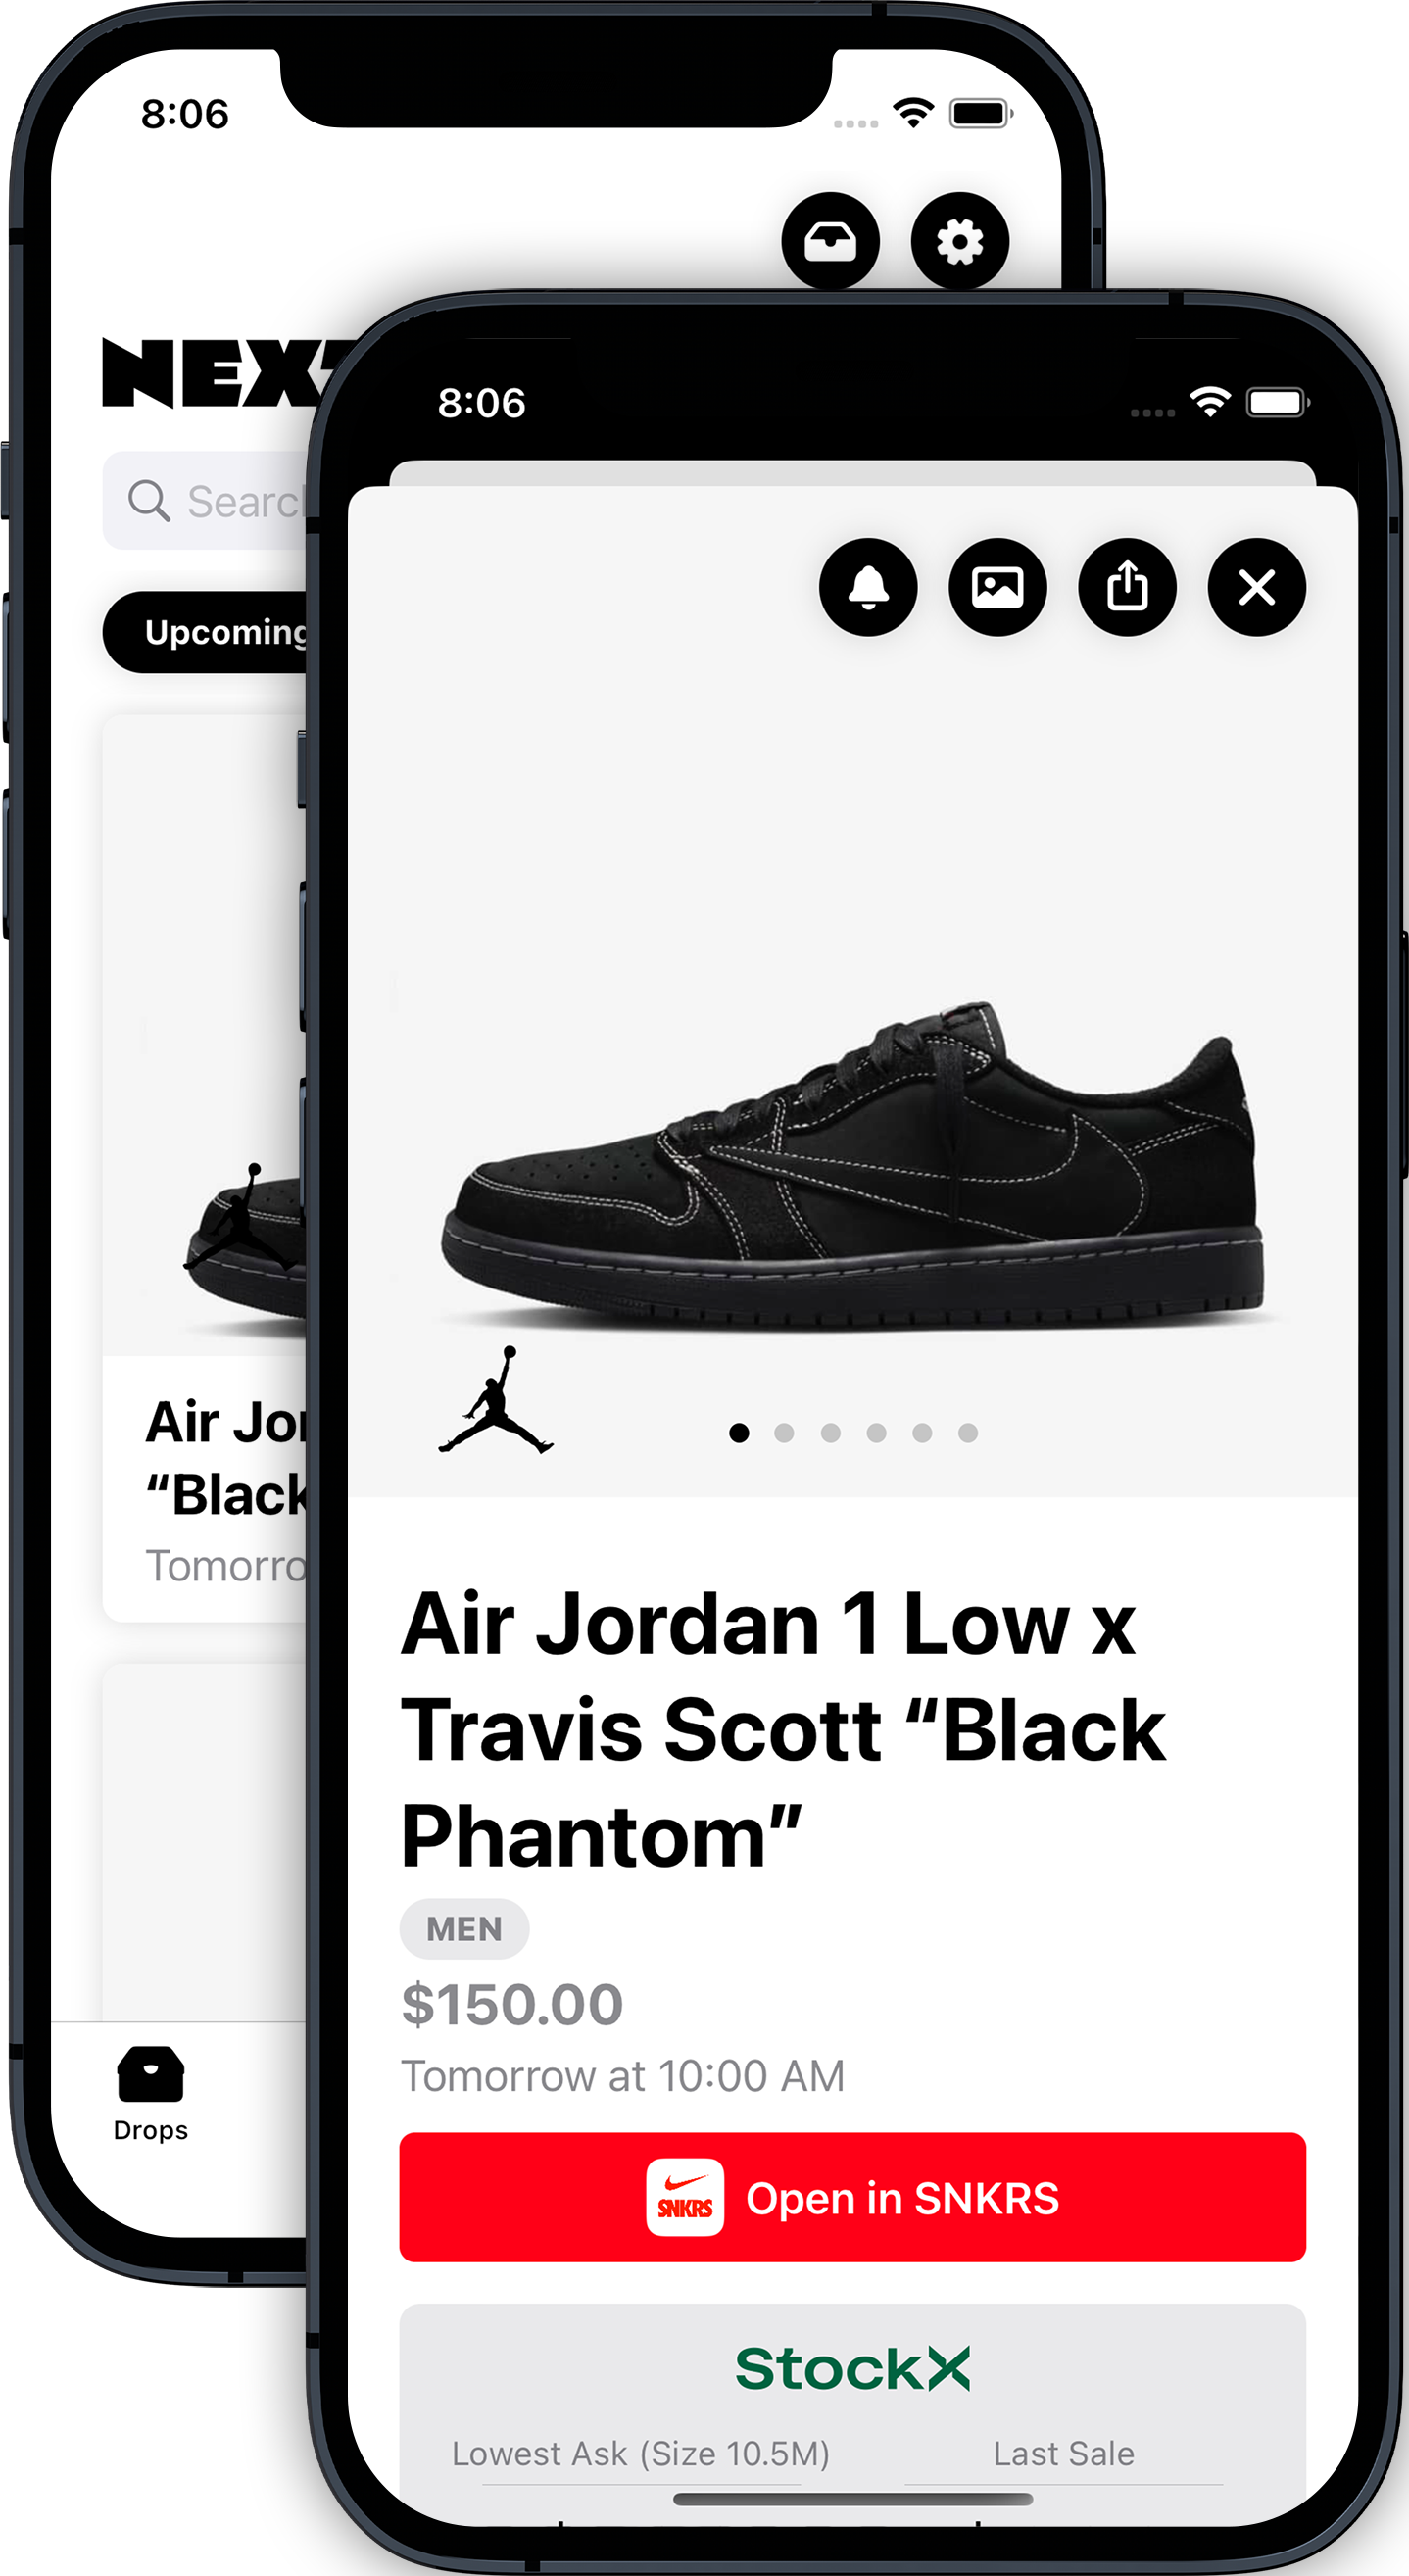 Mockup of Next Drop running on the iPhone